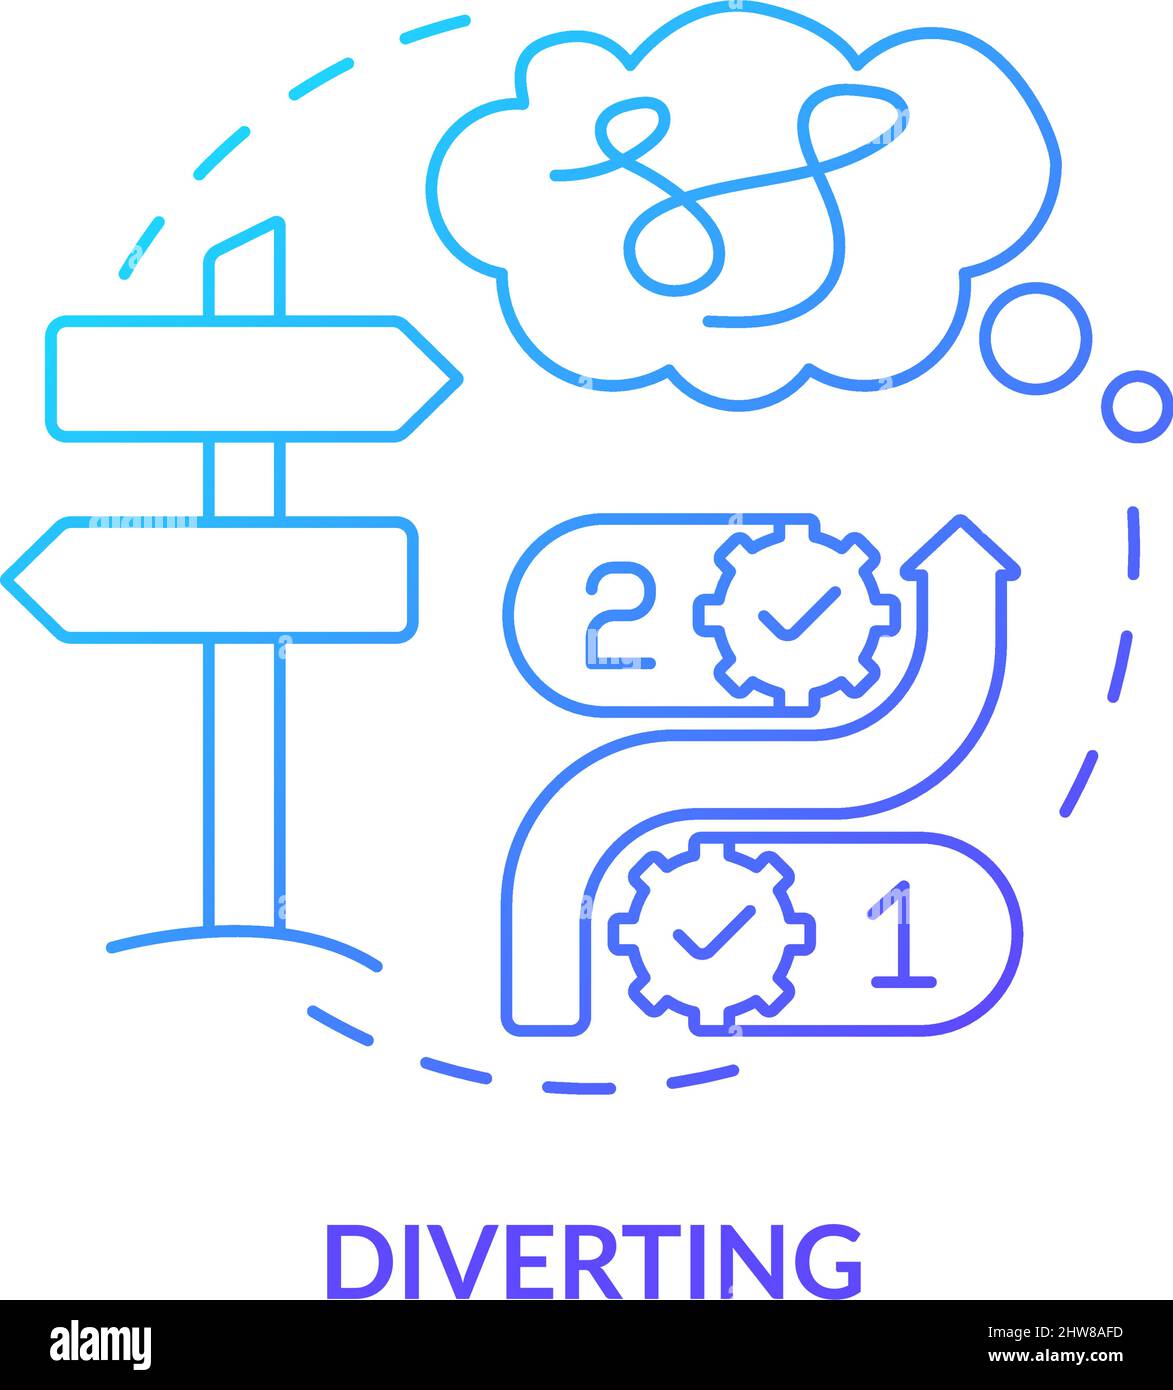 Diverting blue gradient concept icon Stock Vector